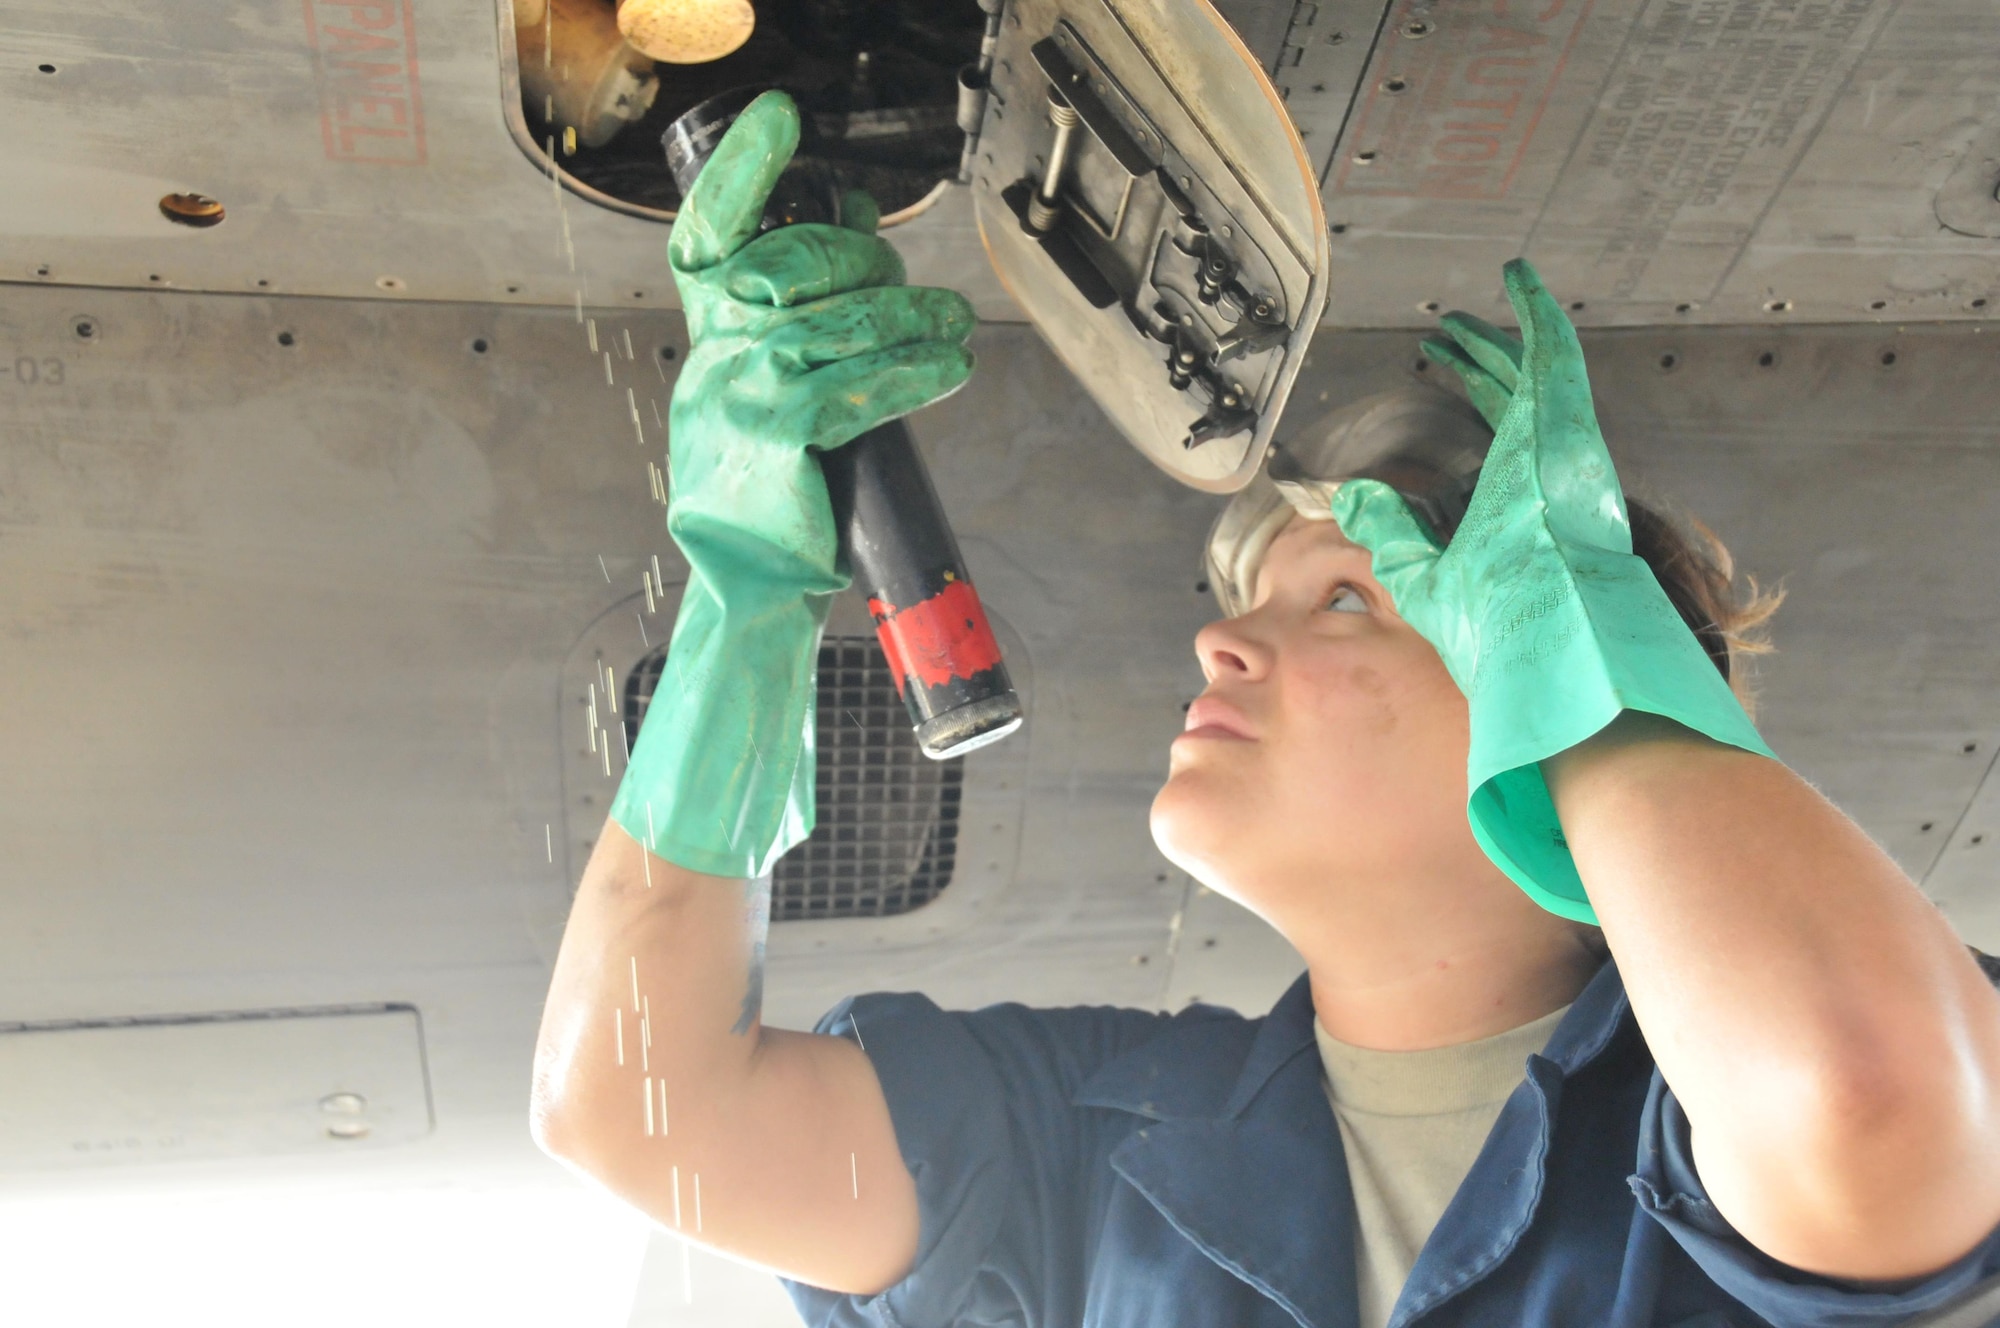 Senior Airman Alexis Anderson, 379th Expeditionary Aircraft Maintenance Squadron crew chief, performs a post-flight inspection on a B-1 B Lancer Jan. 11 at Al Udeid Air Base, Qatar. During the inspection, Anderson services the B-1 with oil. Anderson is deployed from the 307th Expeditionary Aircraft Maintenance Unit at Ellsworth Air Force Base, South Dakota. (U.S. Air Force photo by Tech. Sgt. Terrica Y. Jones/Released)